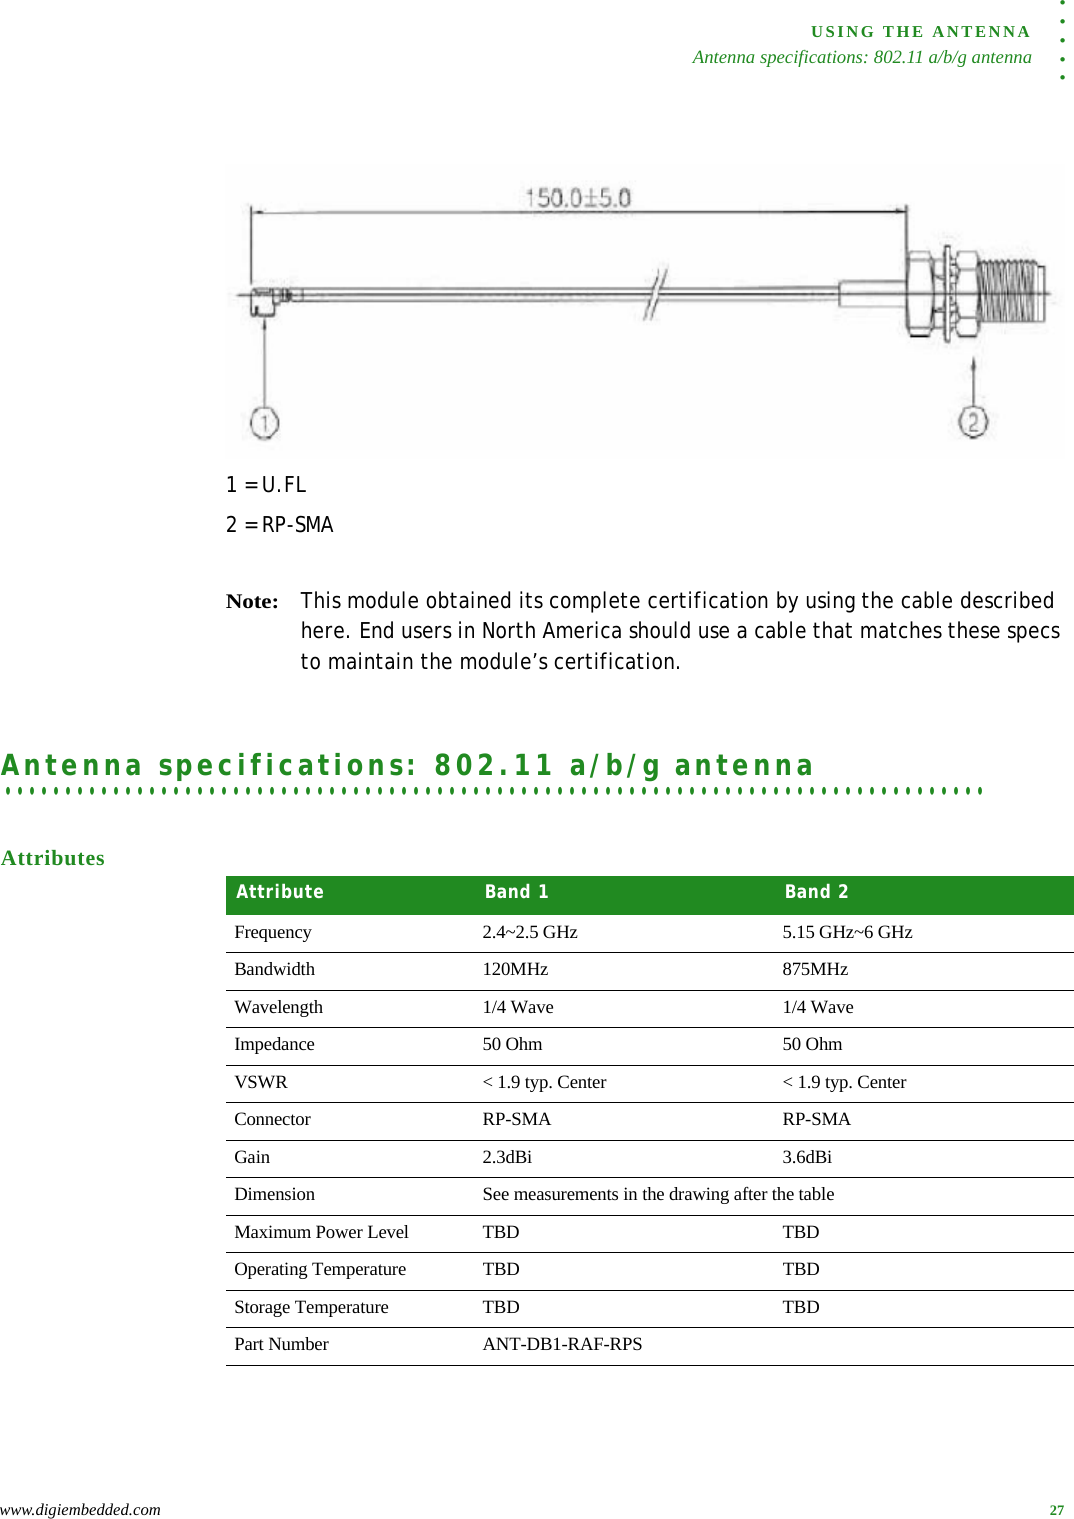 . . . . .USING THE ANTENNAAntenna specifications: 802.11 a/b/g antennawww.digiembedded.com 271 = U.FL2 = RP-SMANote:This module obtained its complete certification by using the cable described here. End users in North America should use a cable that matches these specs to maintain the module’s certification.. . . . . . . . . . . . . . . . . . . . . . . . . . . . . . . . . . . . . . . . . . . . . . . . . . . . . . . . . . . . . . . . . . . . . . . . . . . . . . . . . .Antenna specifications: 802.11 a/b/g antennaAttributesAttribute Band 1 Band 2Frequency 2.4~2.5 GHz 5.15 GHz~6 GHzBandwidth 120MHz 875MHzWavelength 1/4 Wave 1/4 WaveImpedance 50 Ohm 50 OhmVSWR &lt; 1.9 typ. Center &lt; 1.9 typ. CenterConnector RP-SMA RP-SMAGain 2.3dBi 3.6dBiDimension See measurements in the drawing after the tableMaximum Power Level TBD TBDOperating Temperature TBD TBDStorage Temperature TBD TBDPart Number ANT-DB1-RAF-RPS